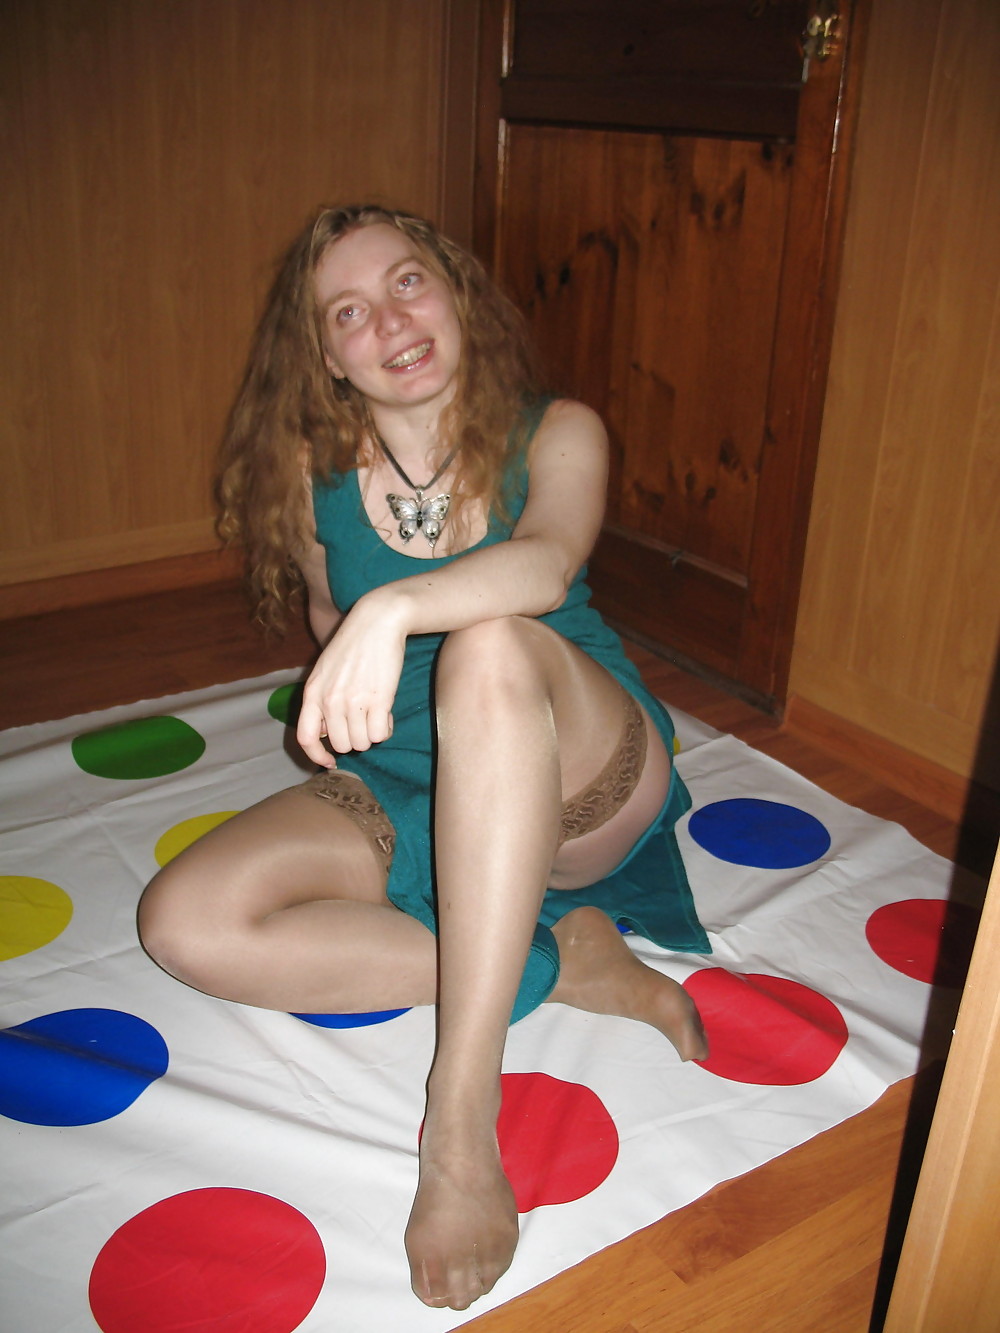 Playing Twister, Upskirt, Nude and Downblouse #2757166